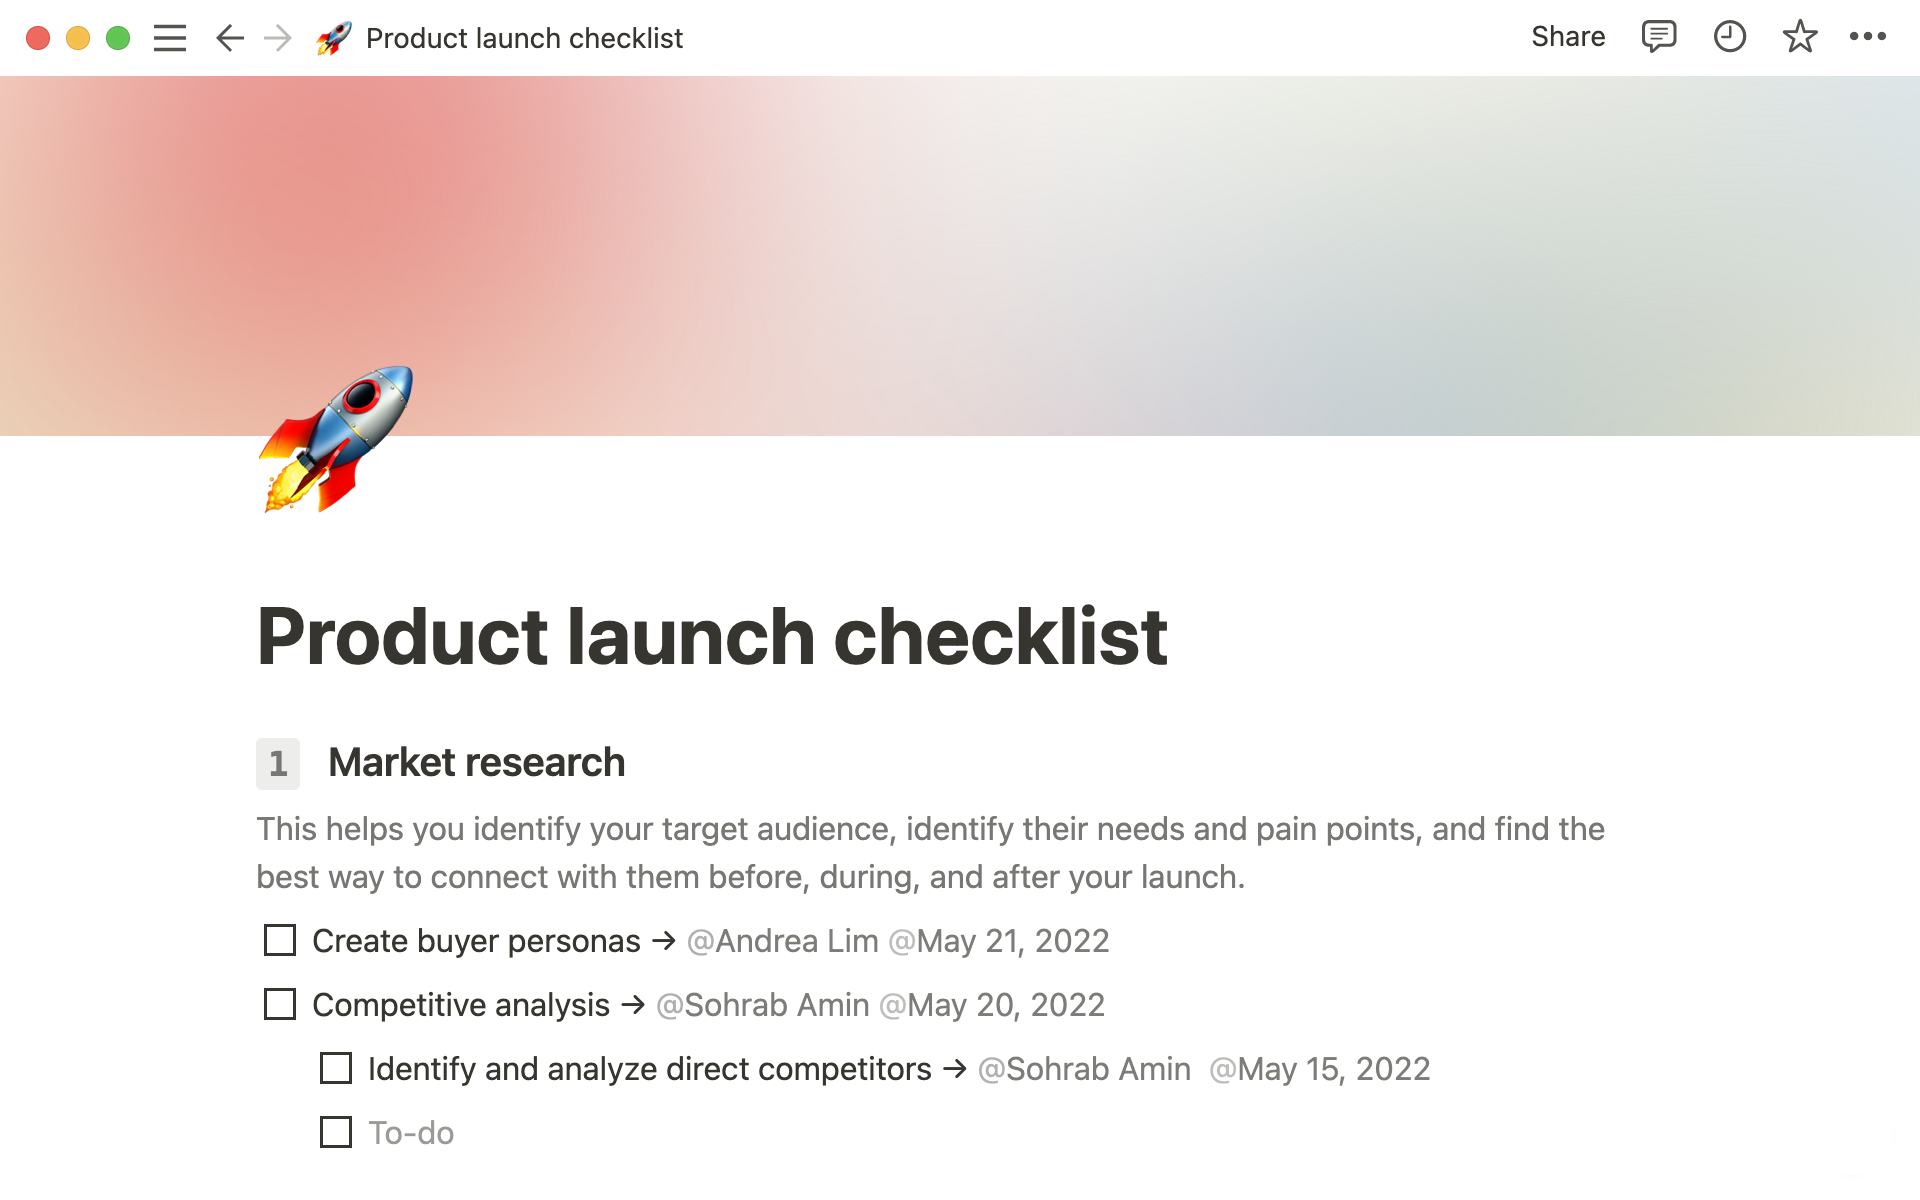 Product launch checklist template